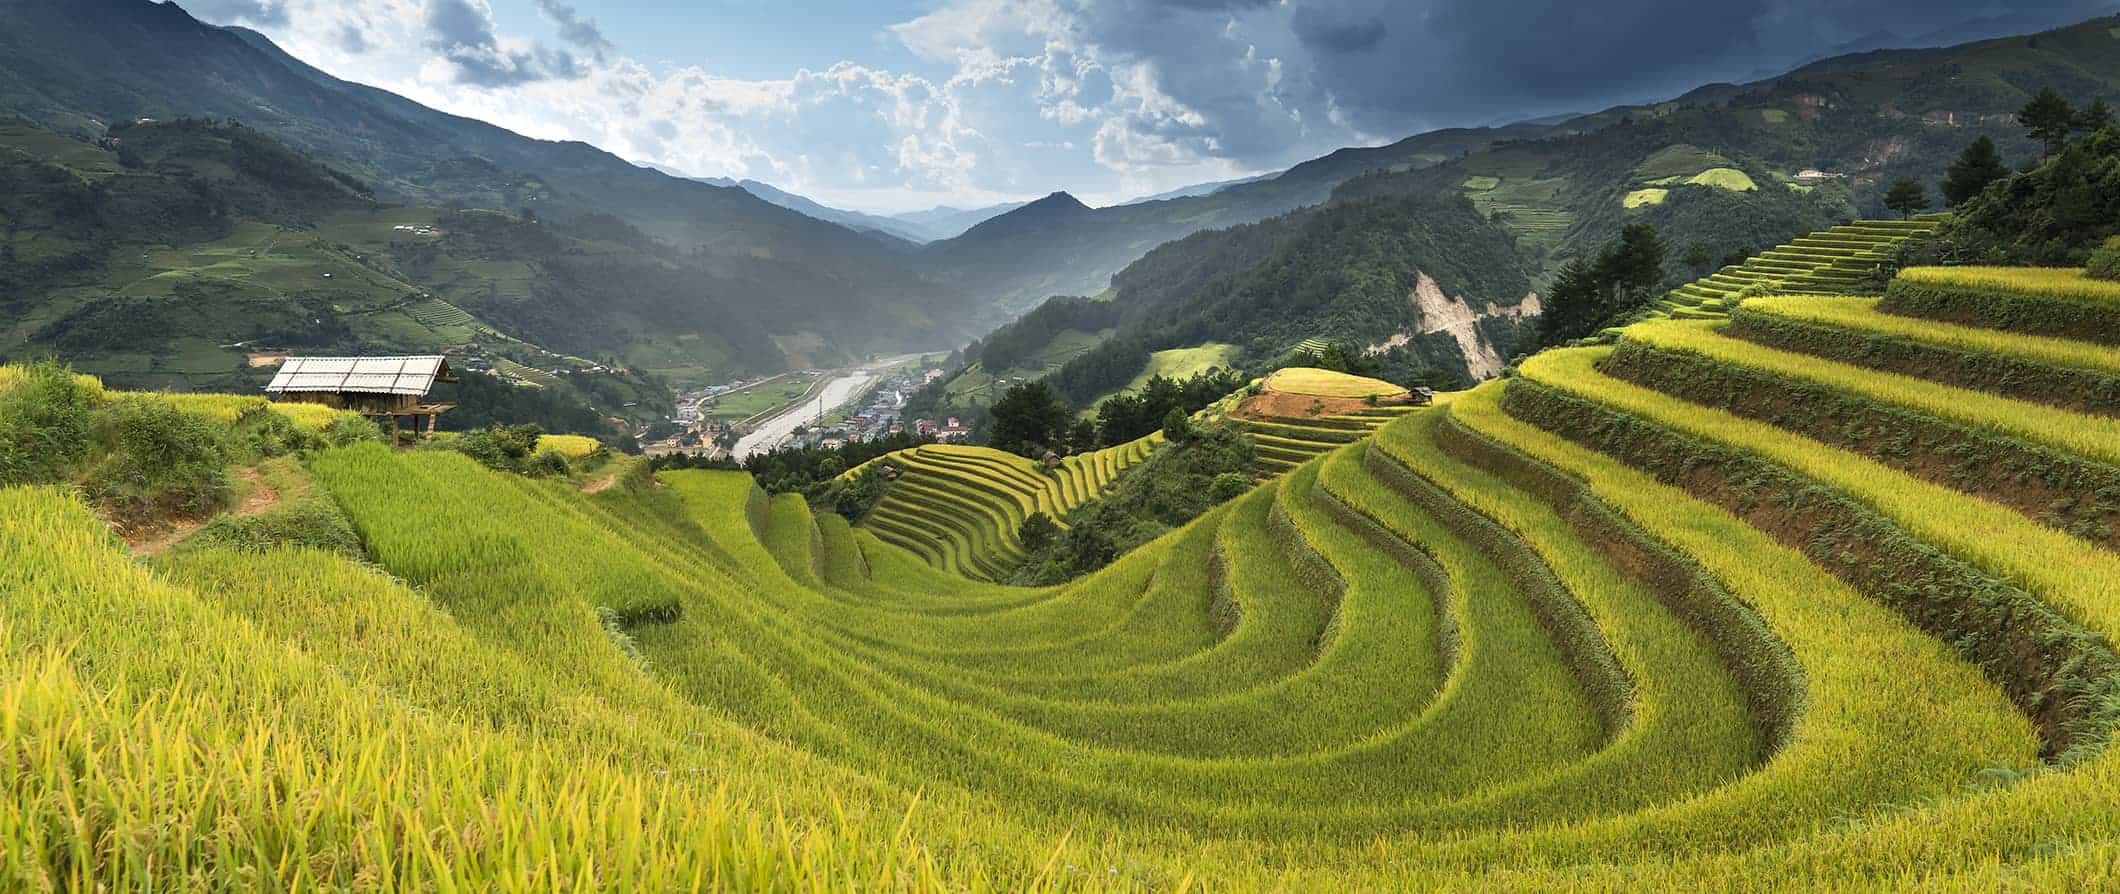 Rice terraces in Vietnam surrounded by list hills and mountains on a sunny day